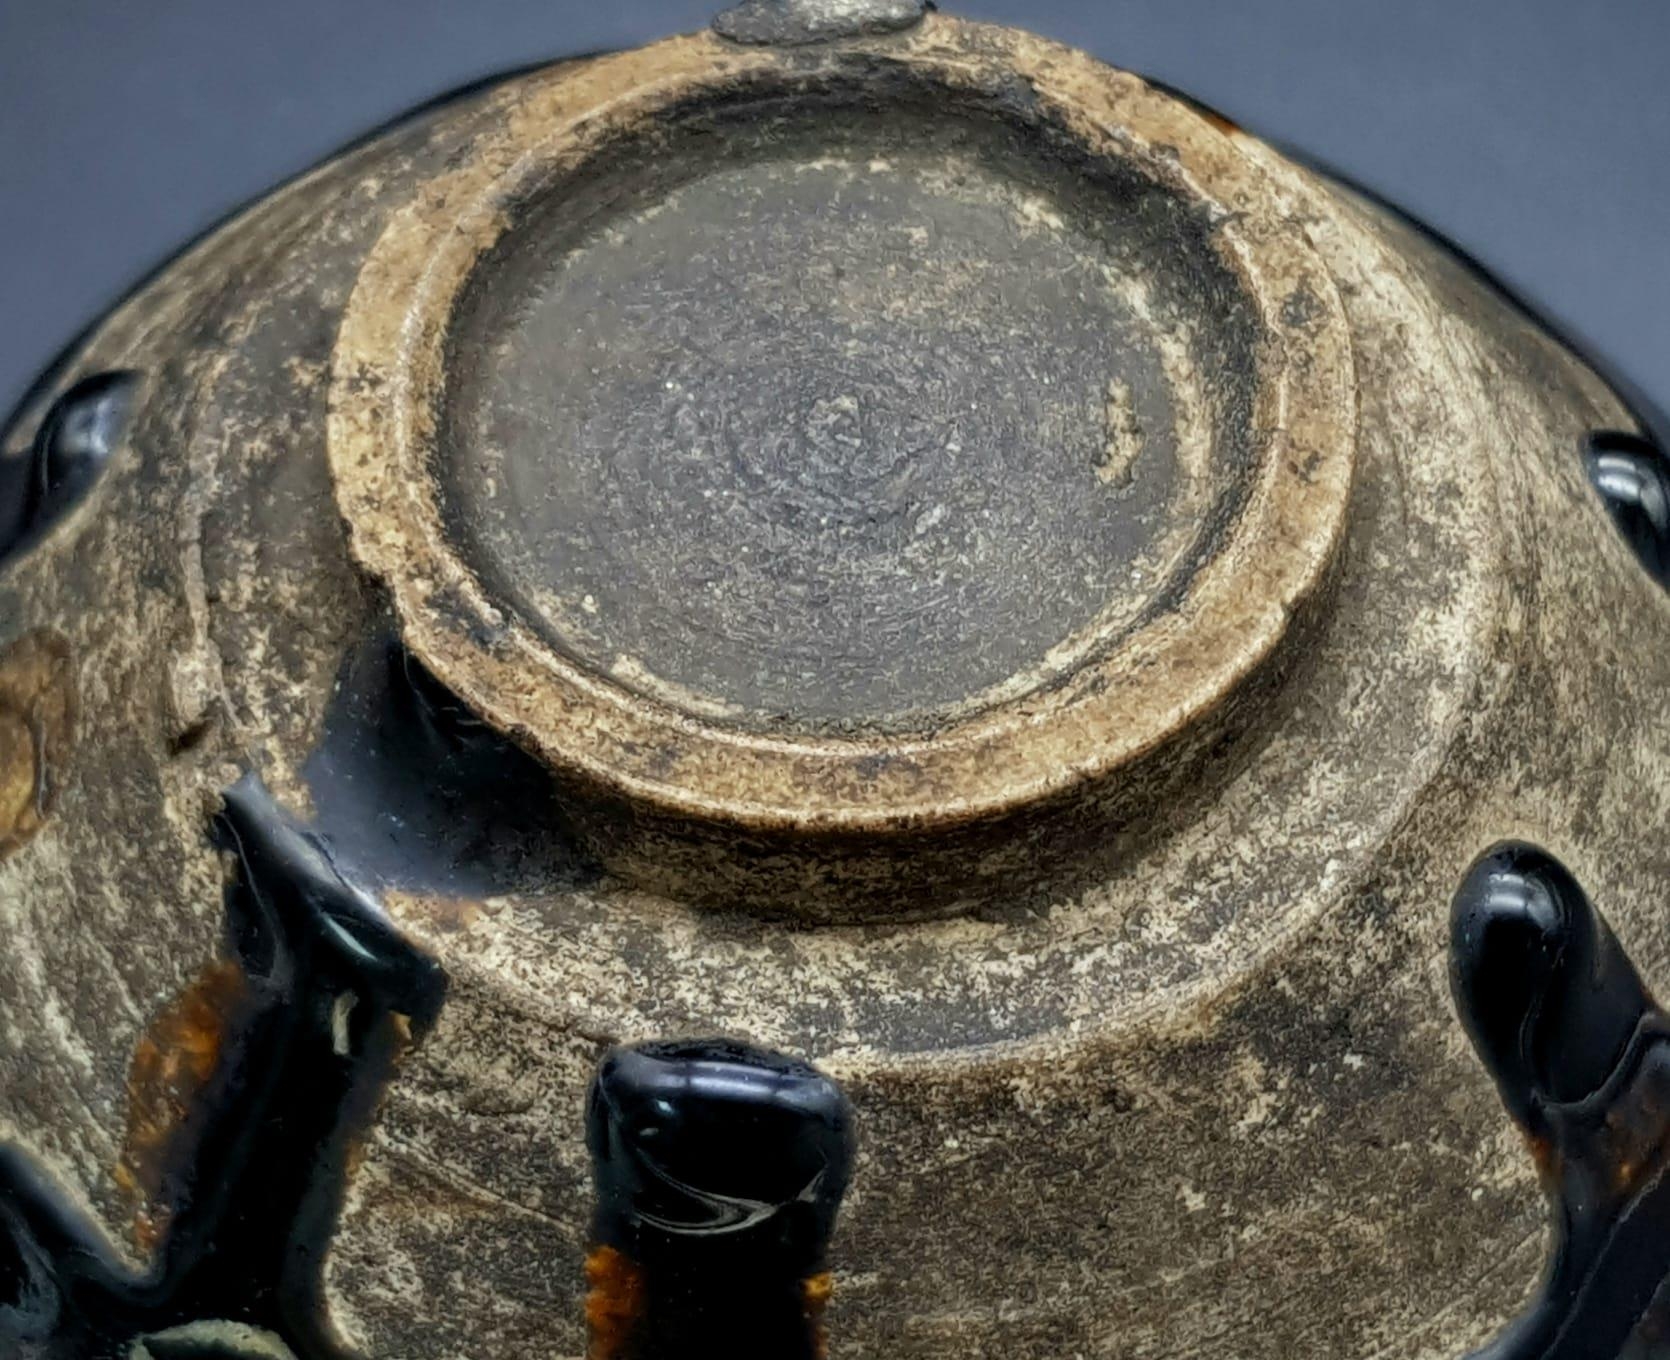 A VERY RARE CHINESE SONG PERIOD (900-1200) JIAN TEA BOWL , WITH A UNIQUE METAL BAND AROUND THE RIM - Bild 5 aus 6